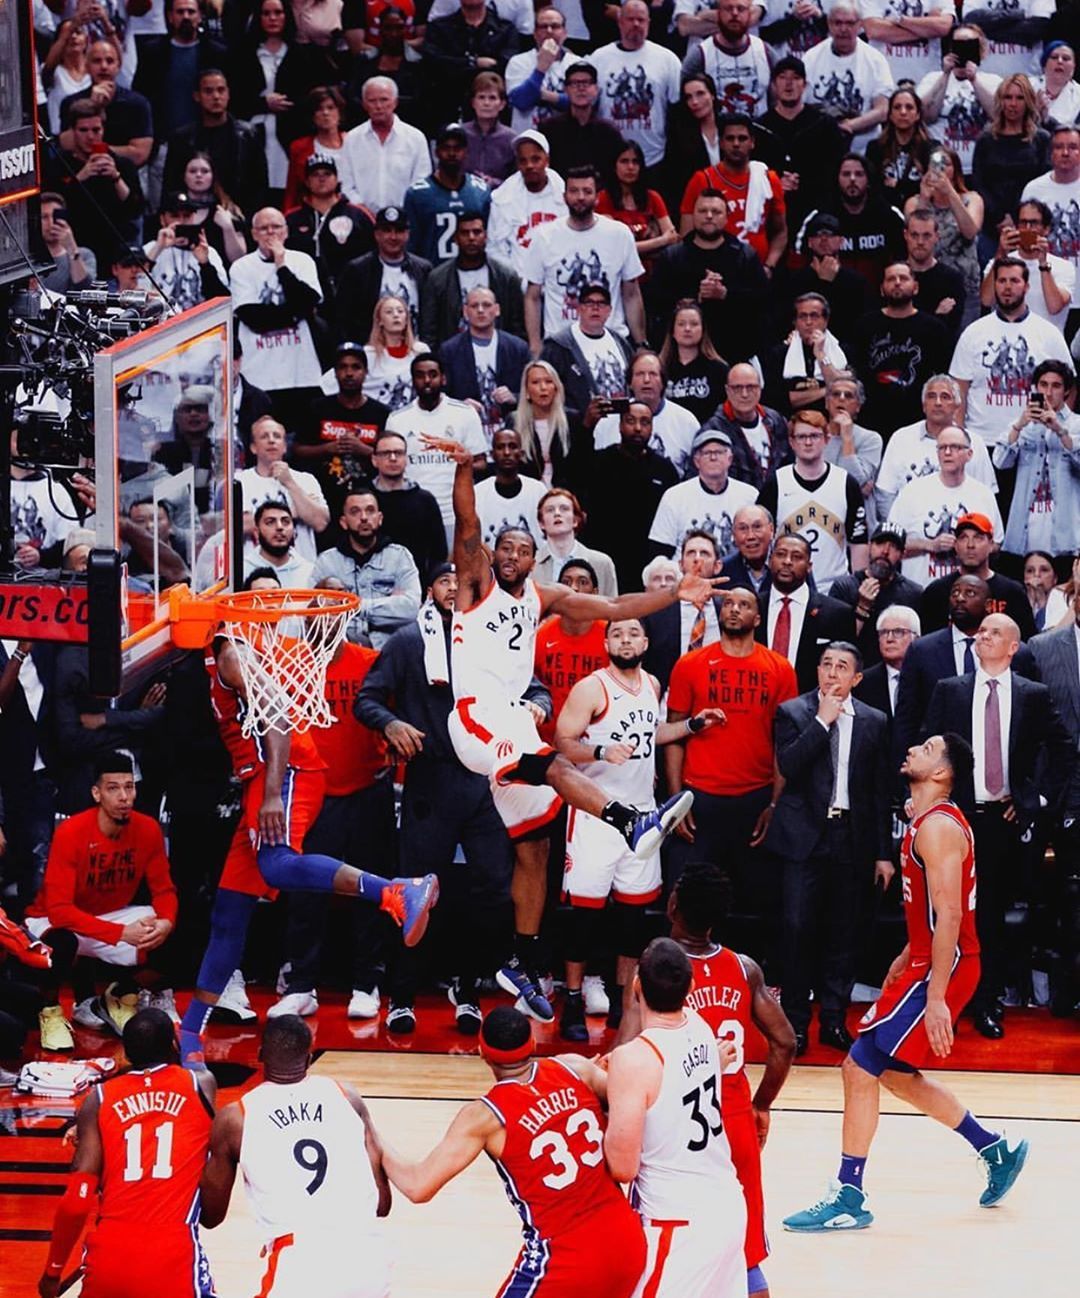 Kawhi hit one of the biggest shots in NBA Playoffs history tonight